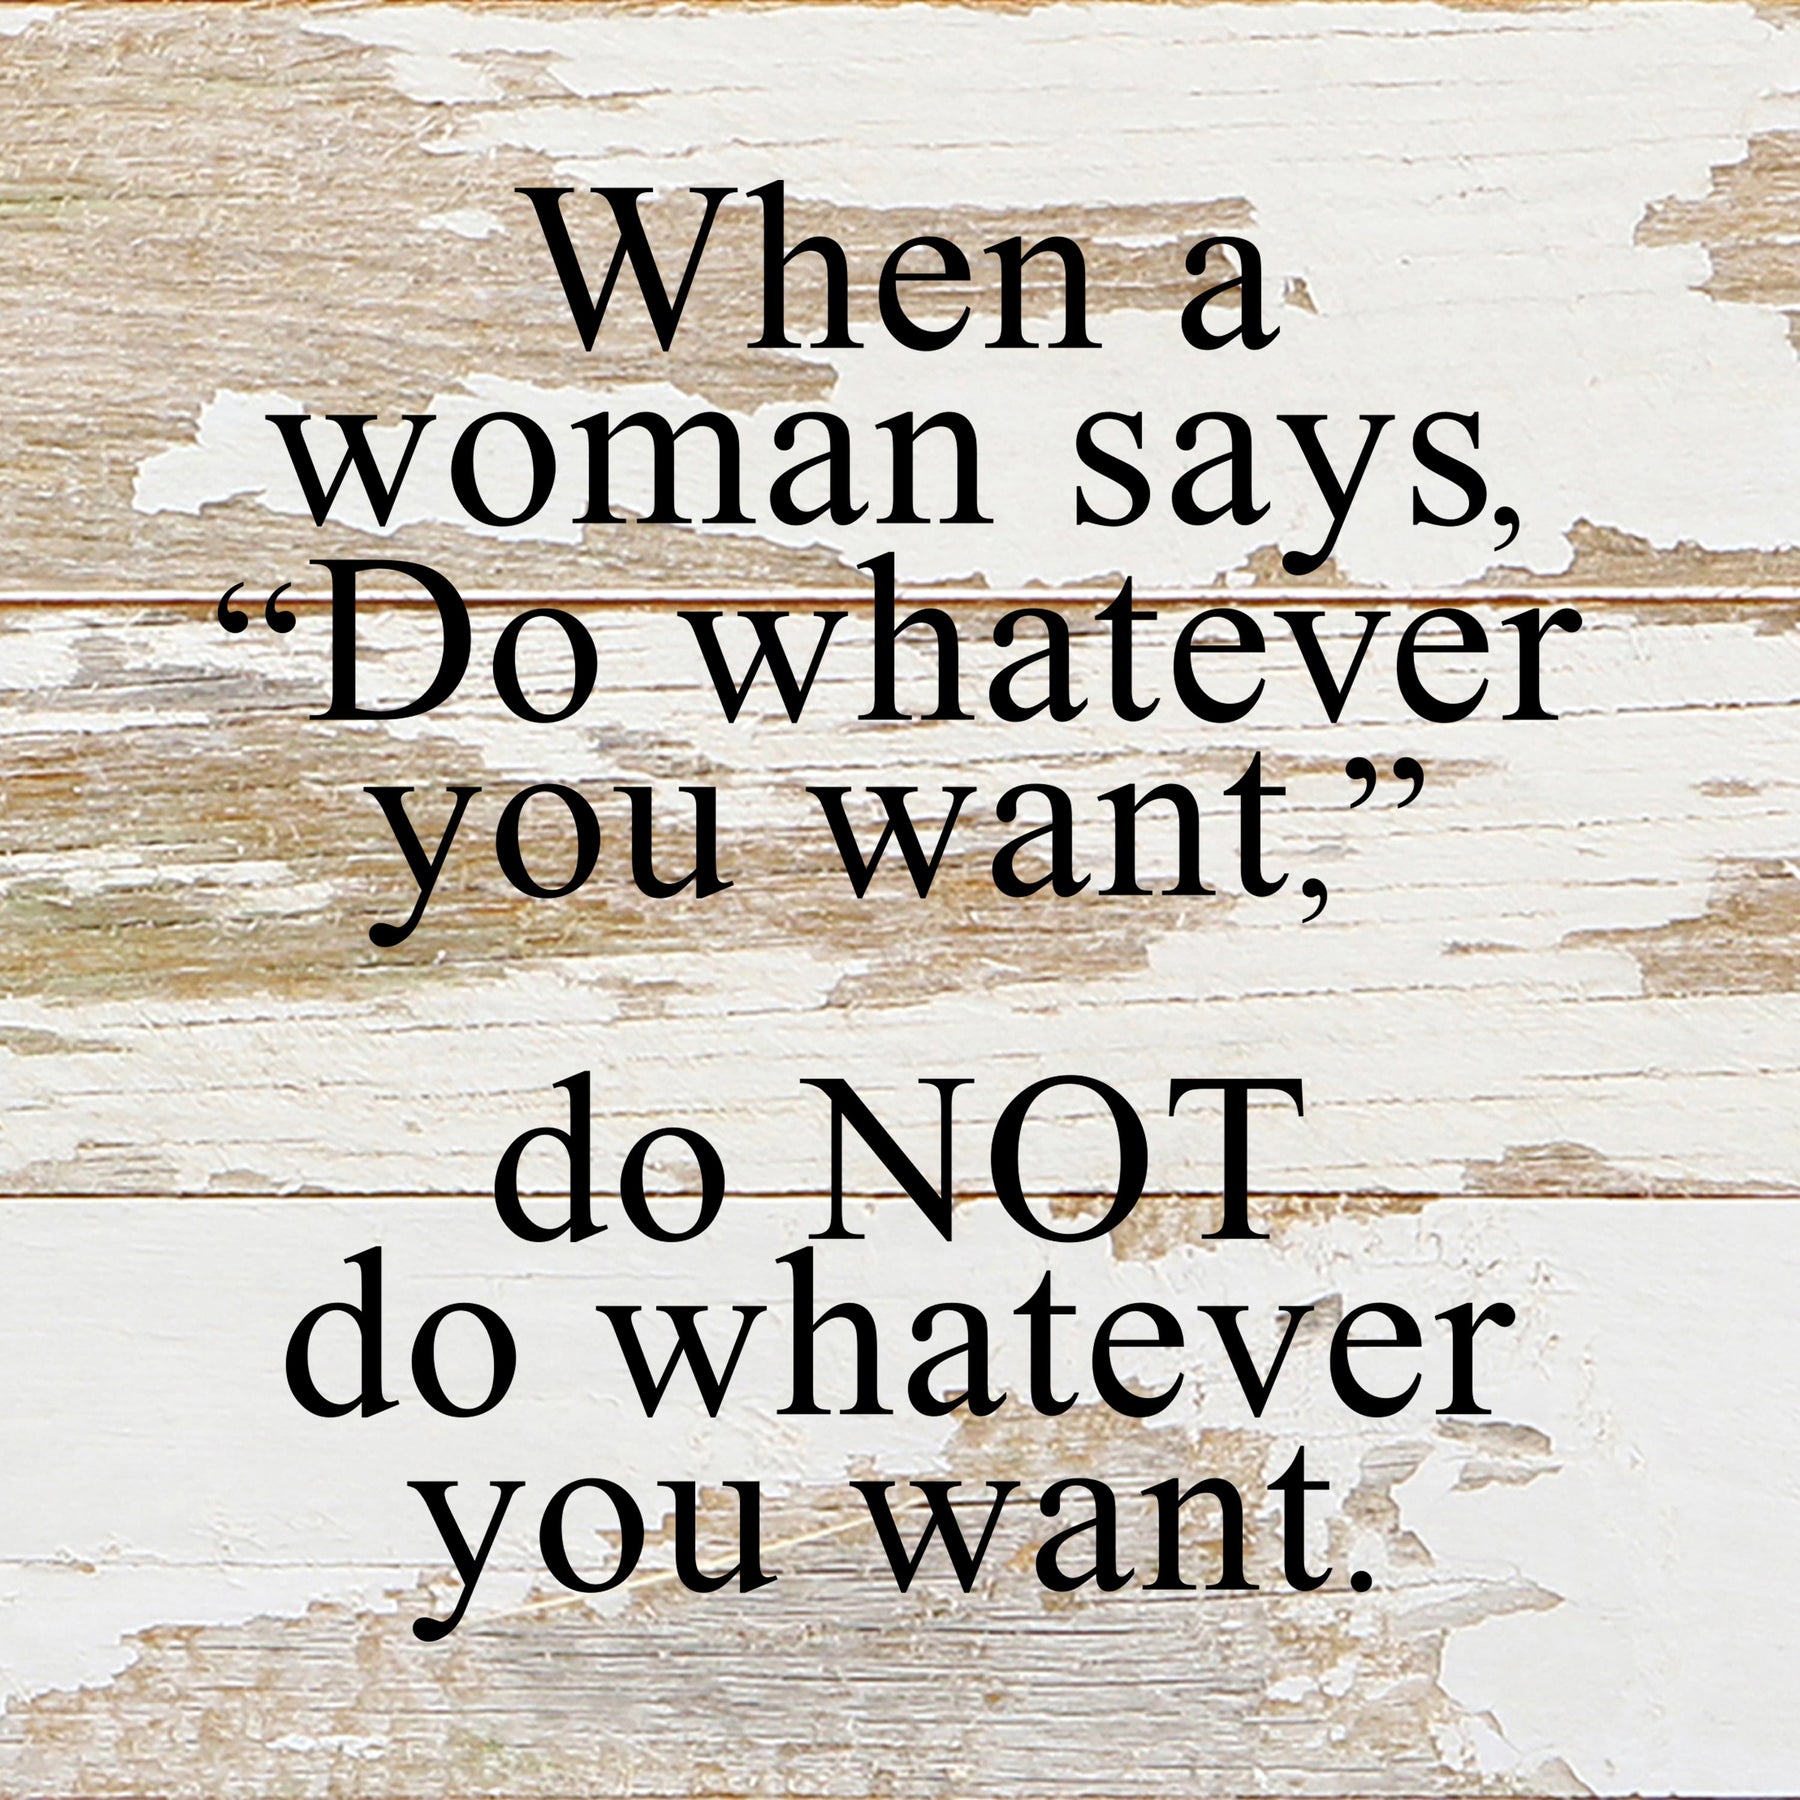 When a woman says, "Do whatever you want," do NOT do whatever you want. / 6"x6" Reclaimed Wood Sign